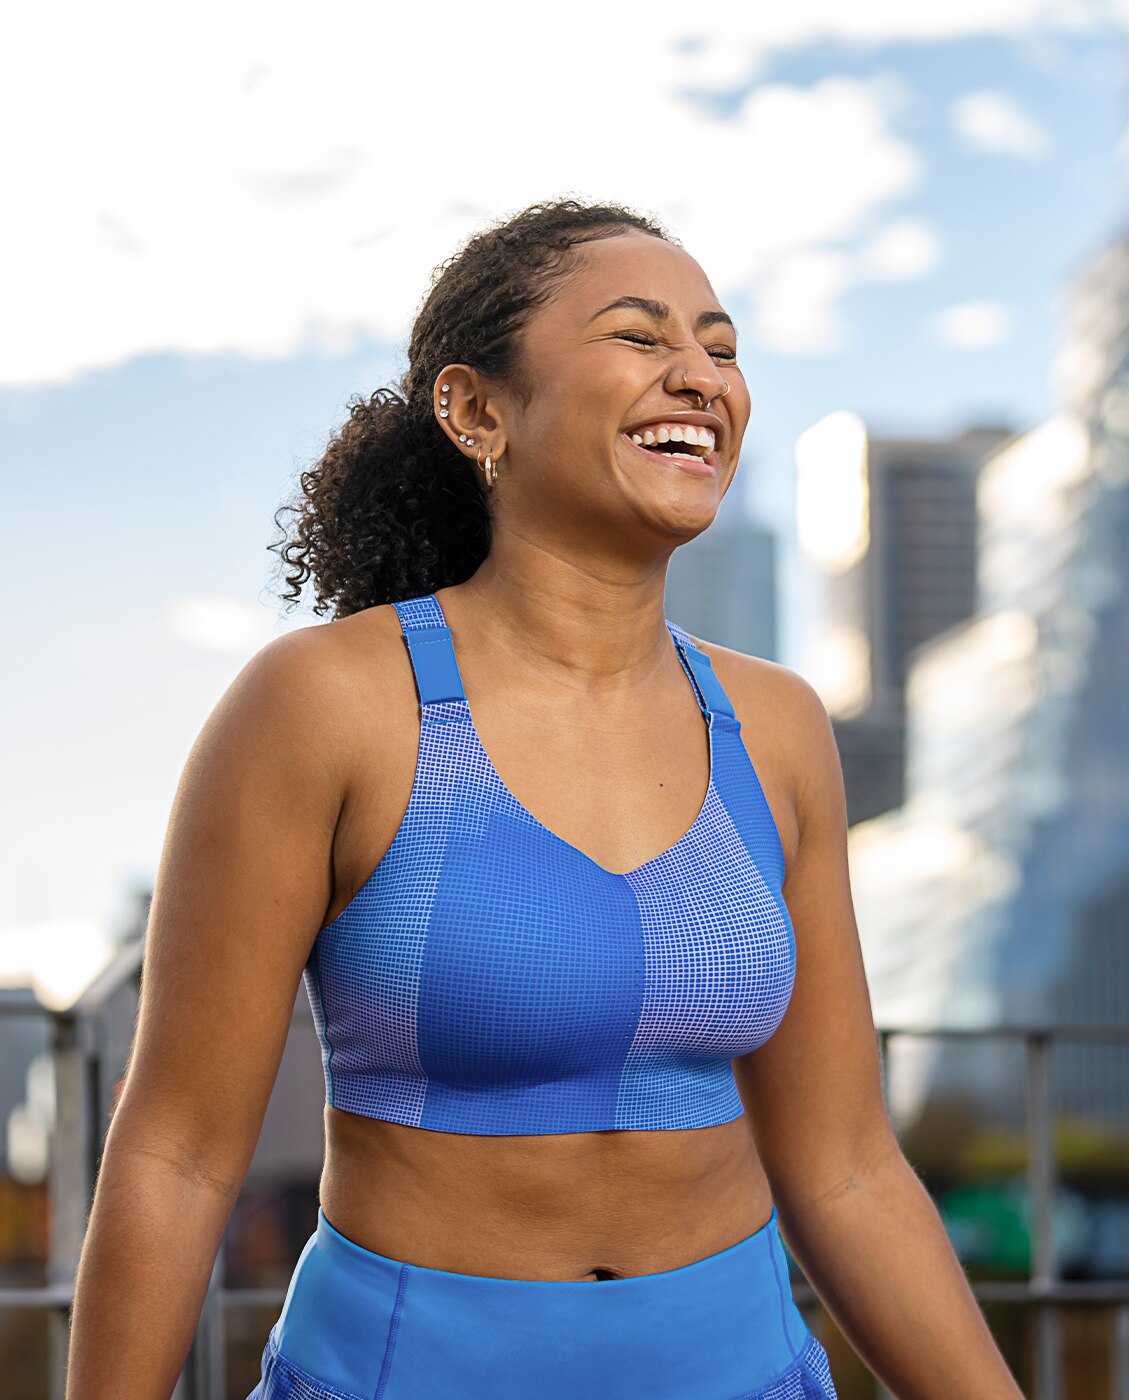 A woman smiling on the street, one in a blue Brooks Run Bra